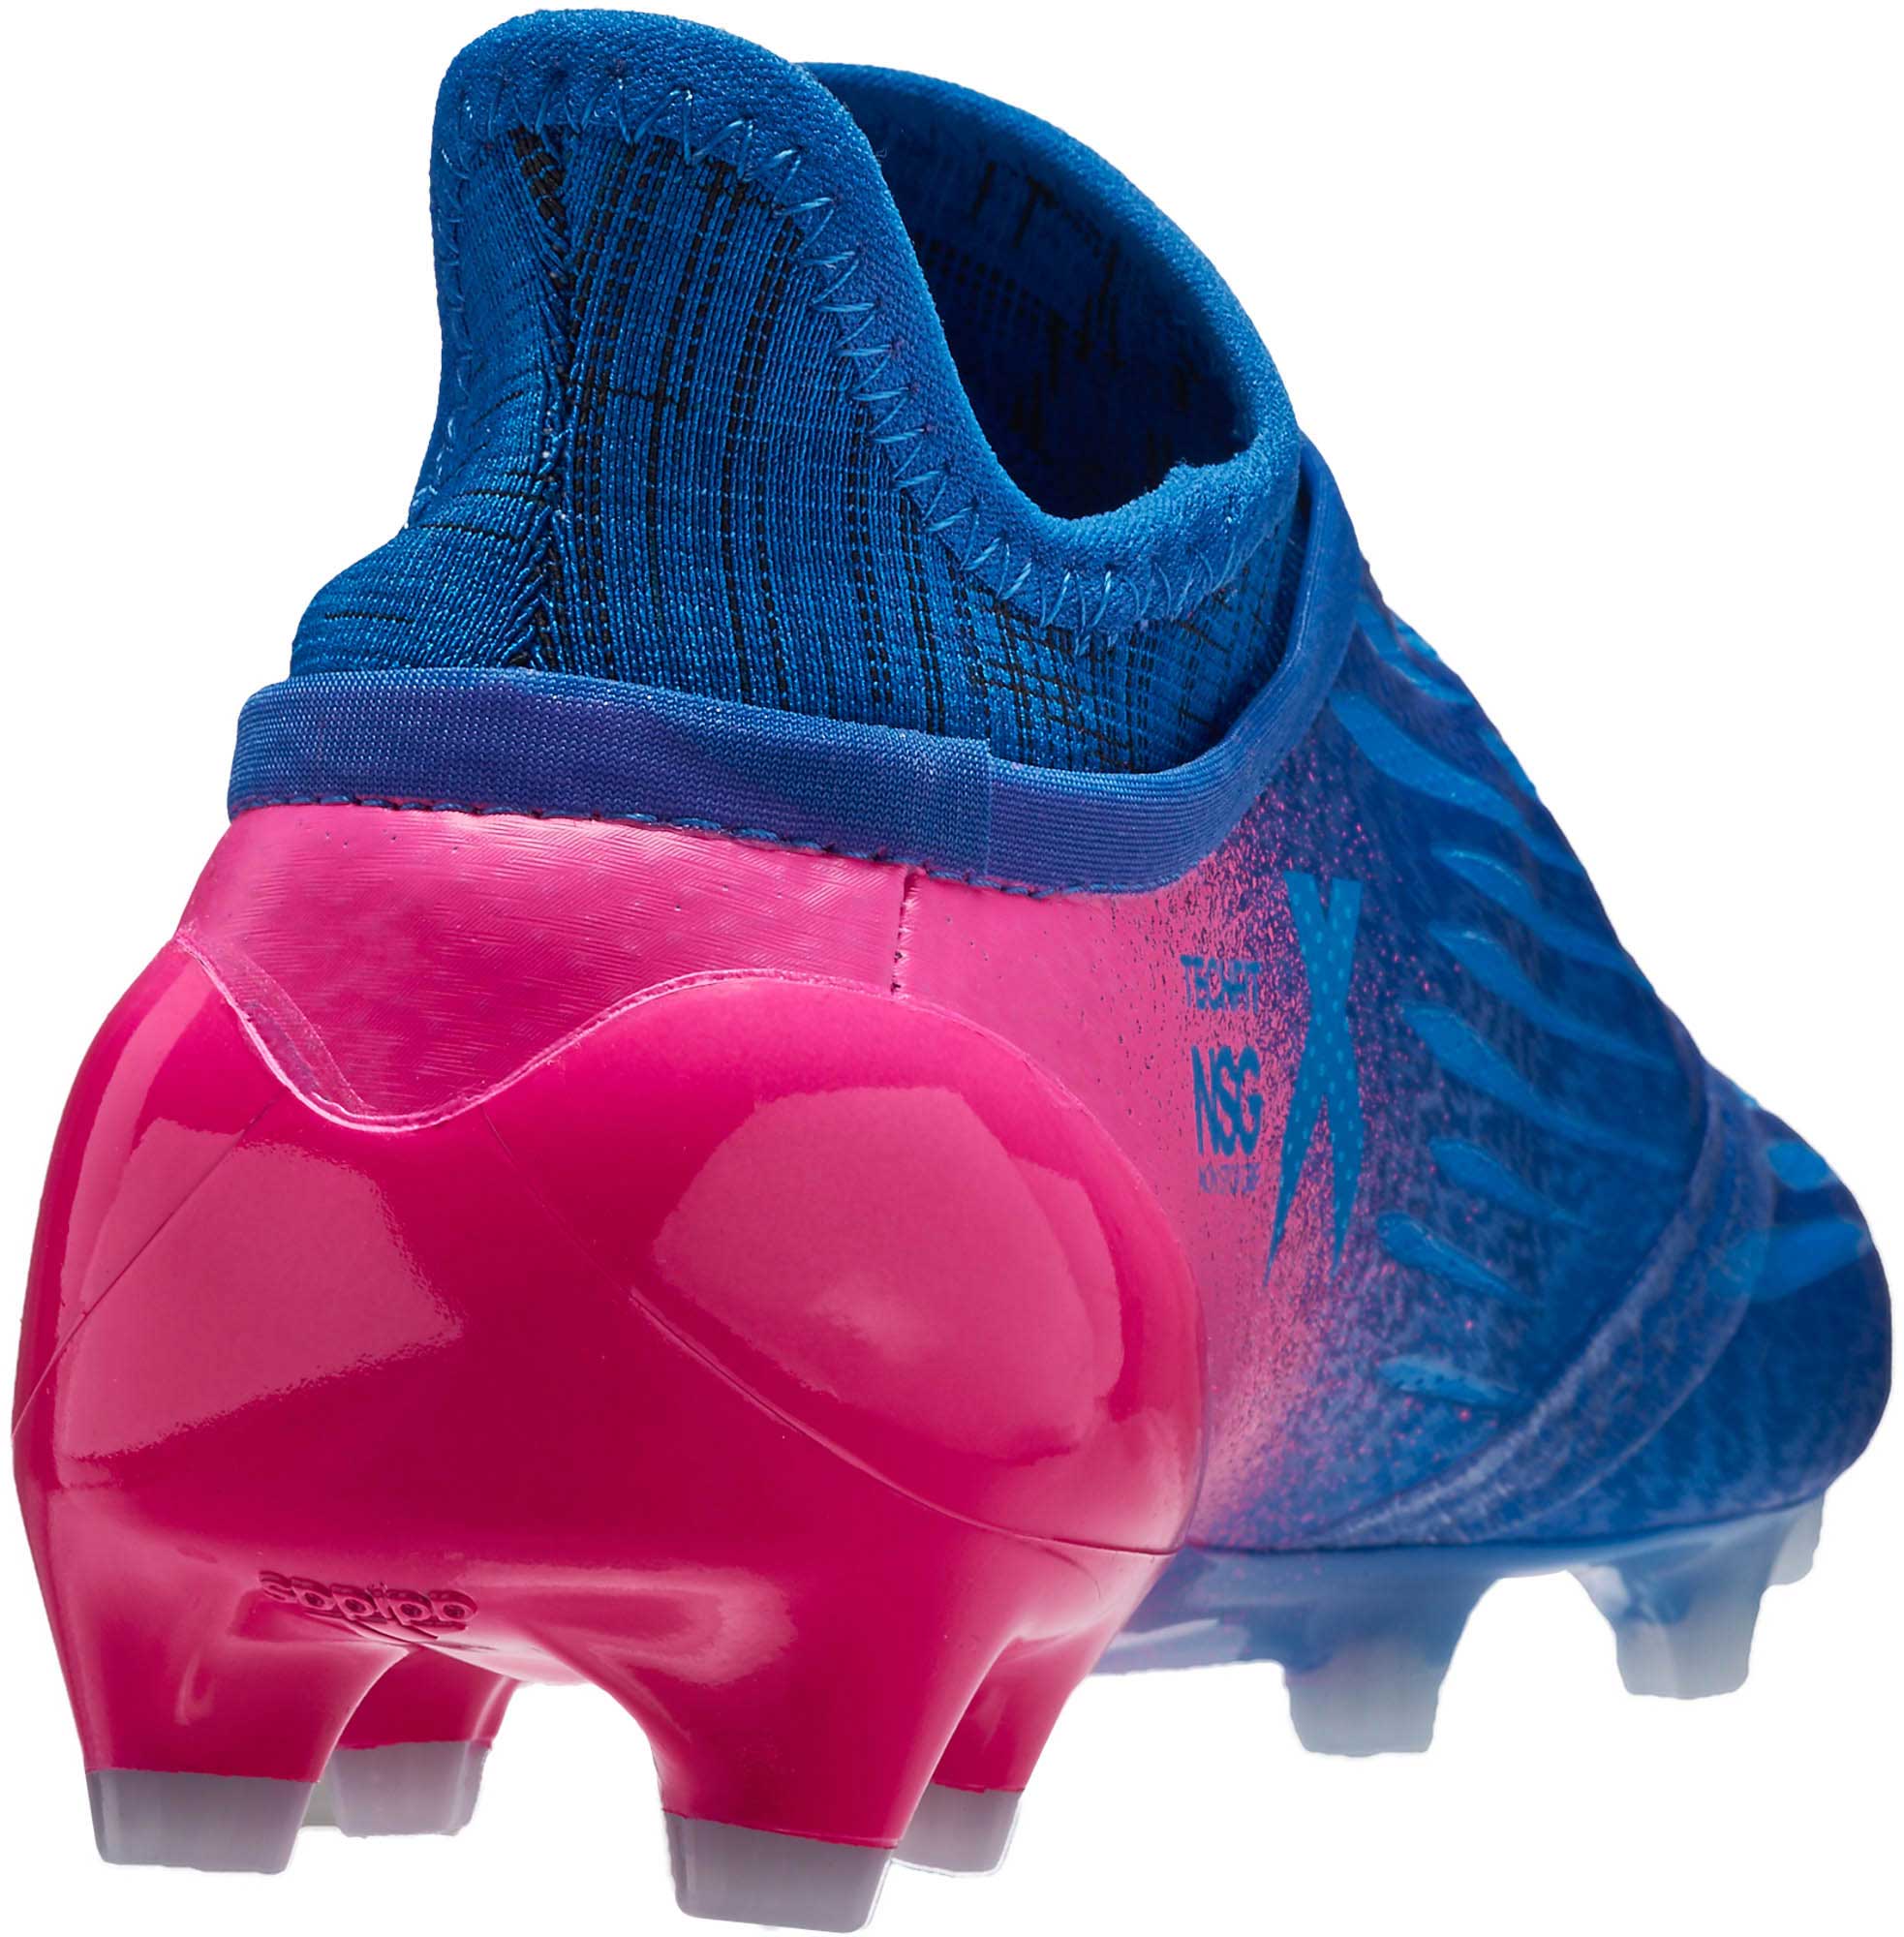 adidas x 16 purechaos blue and pink